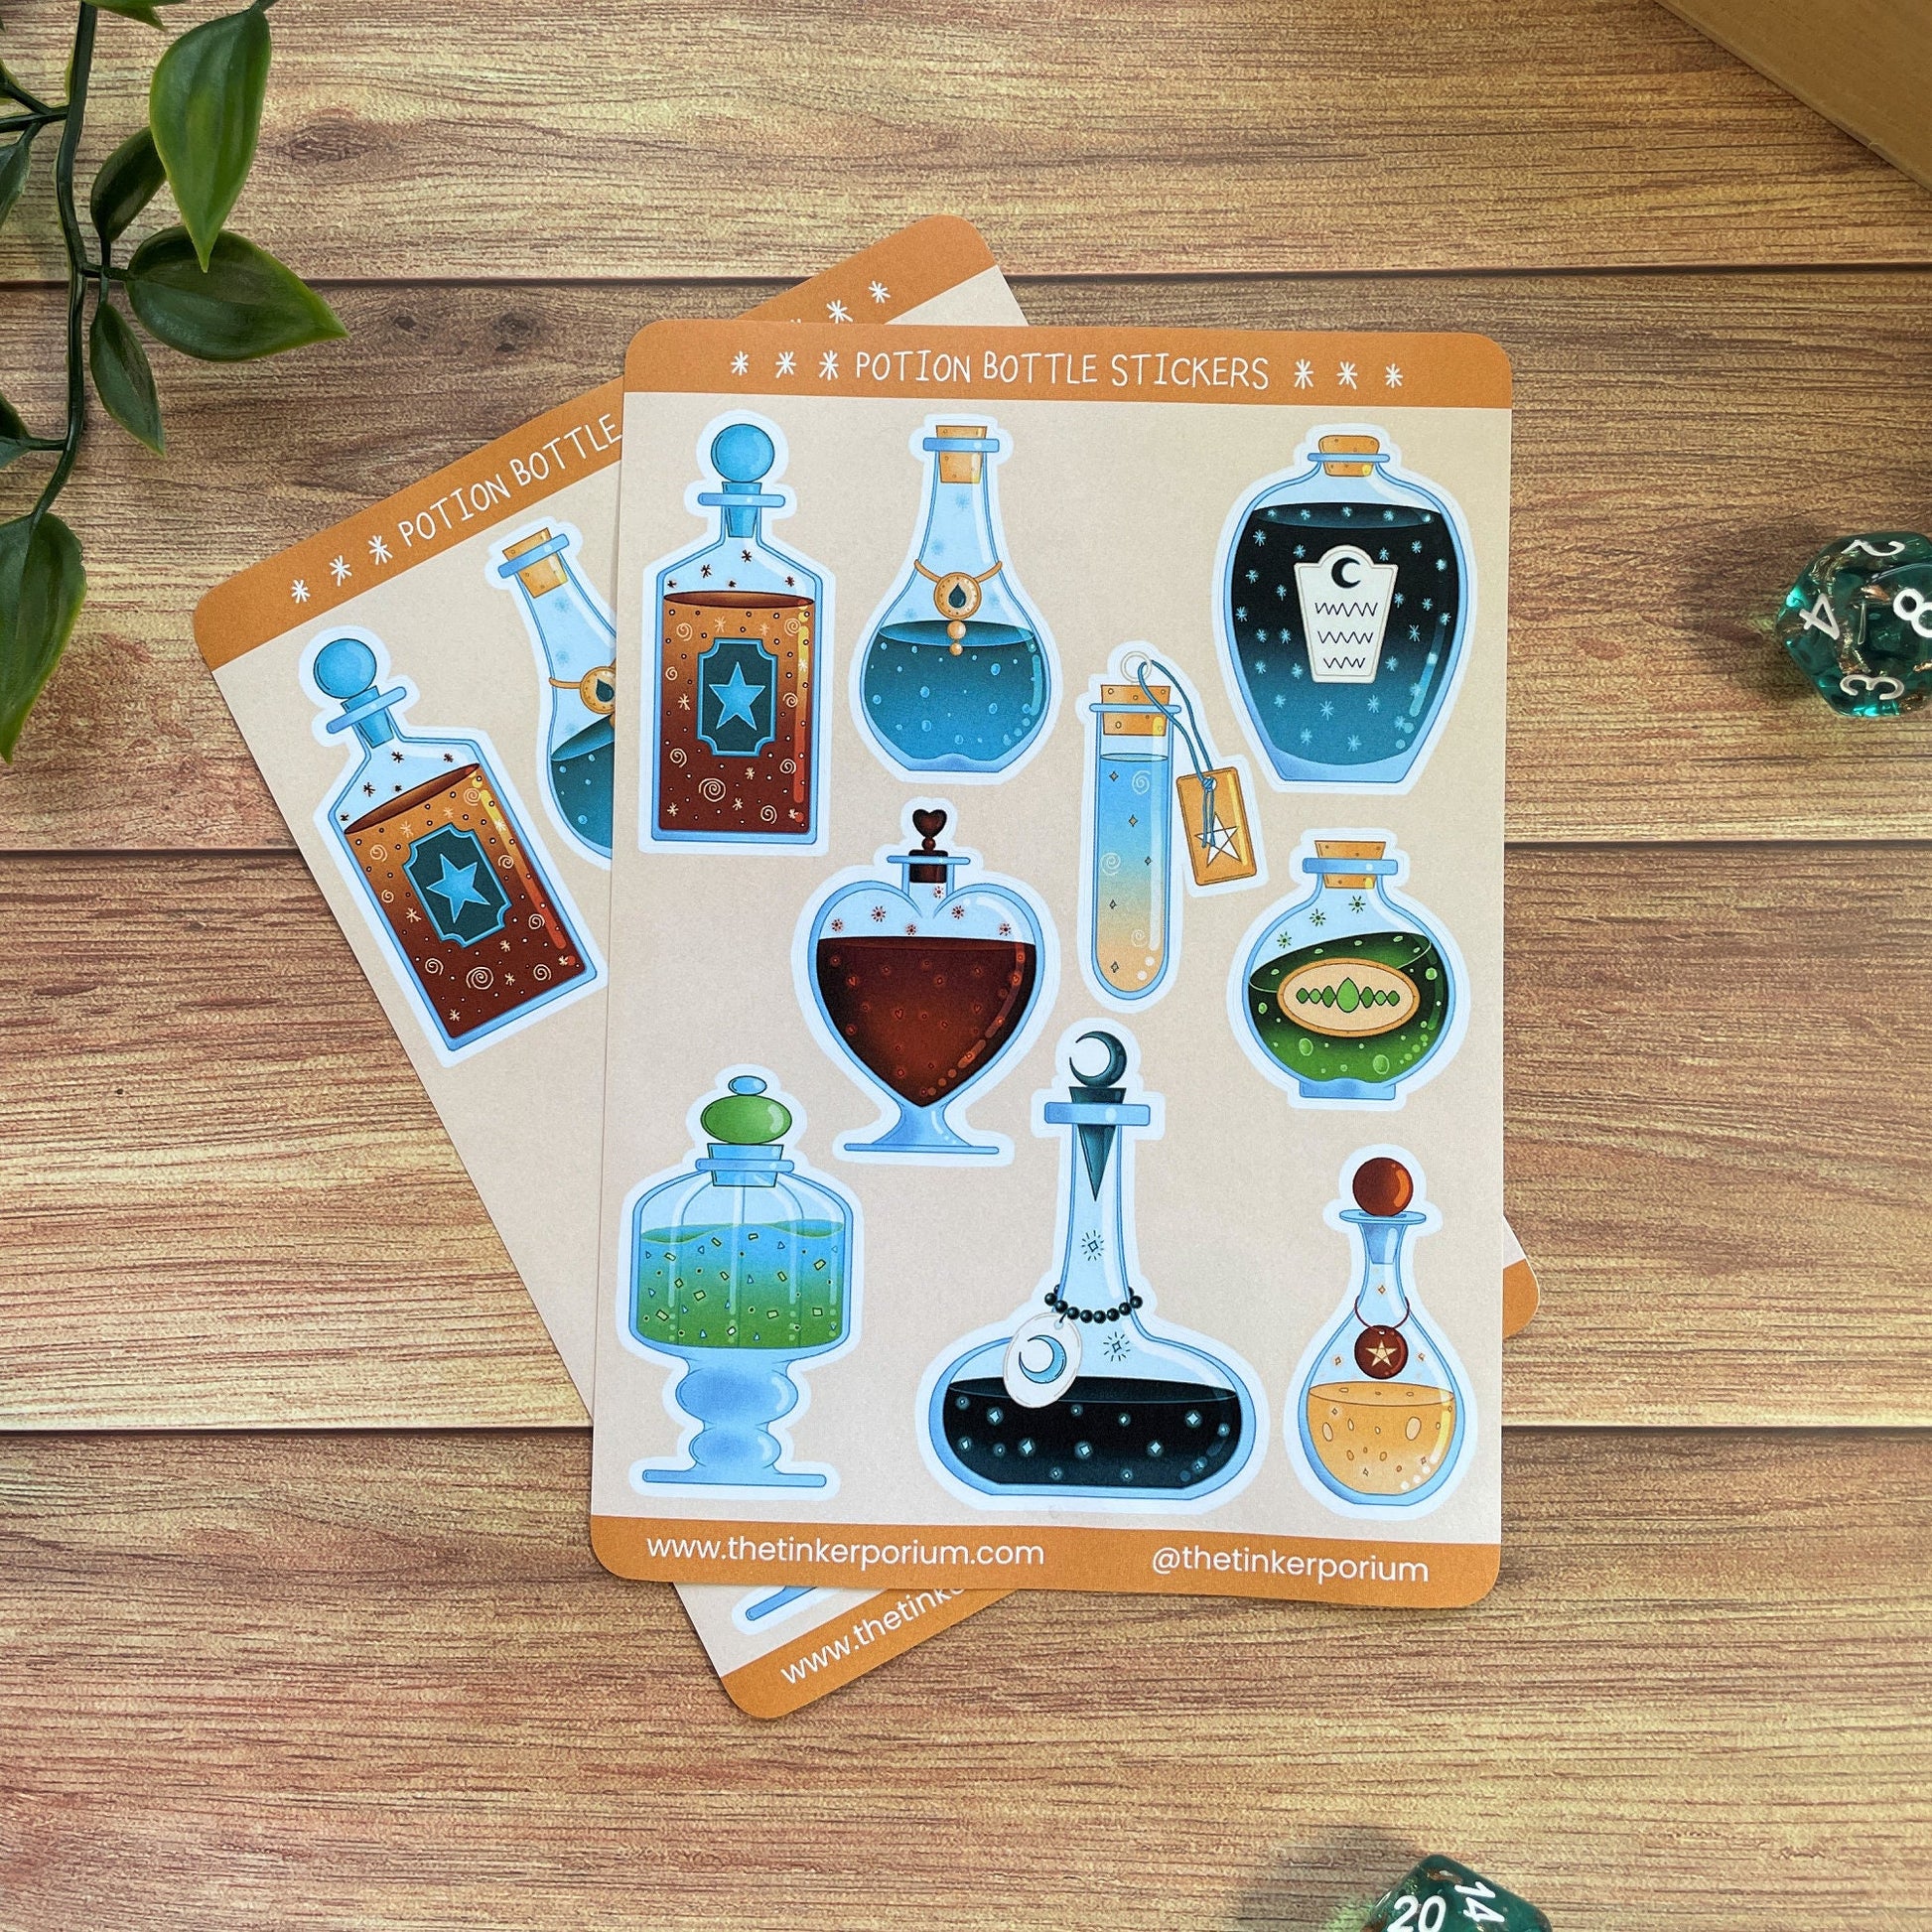 Potion Bottle sticker sheet perfect for an apothecary